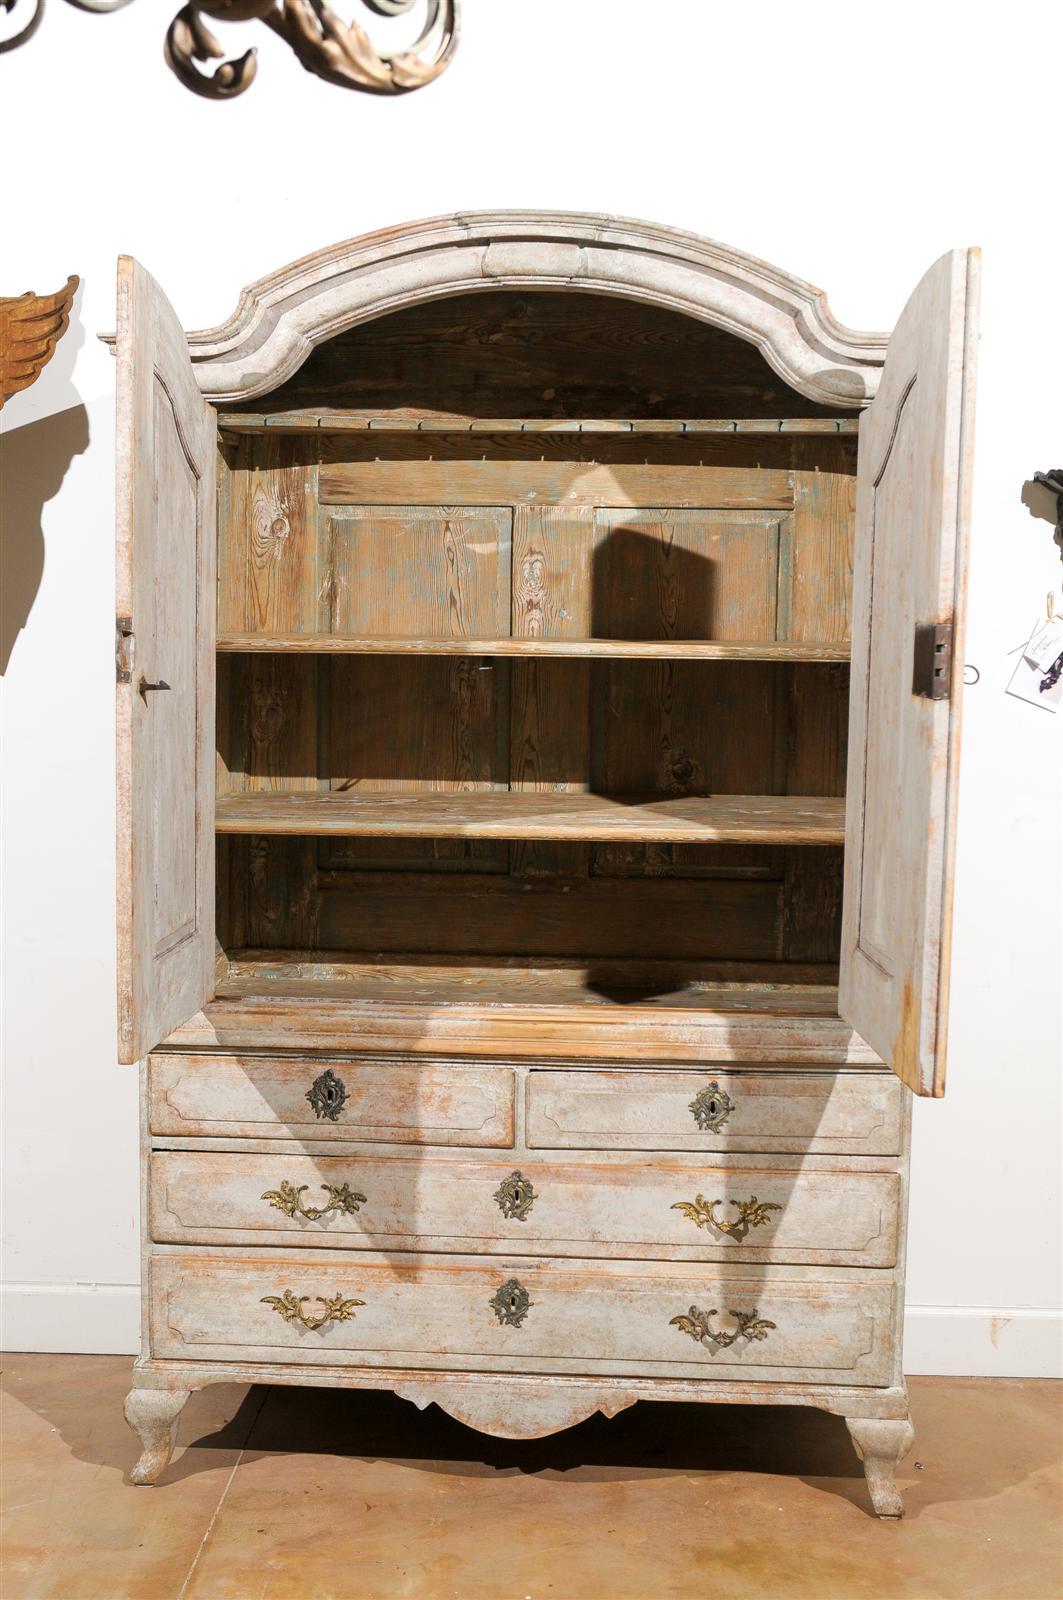 18th Century Swedish Period Rococo Wooden Cabinet with Original Paint and Bonnet Pediment